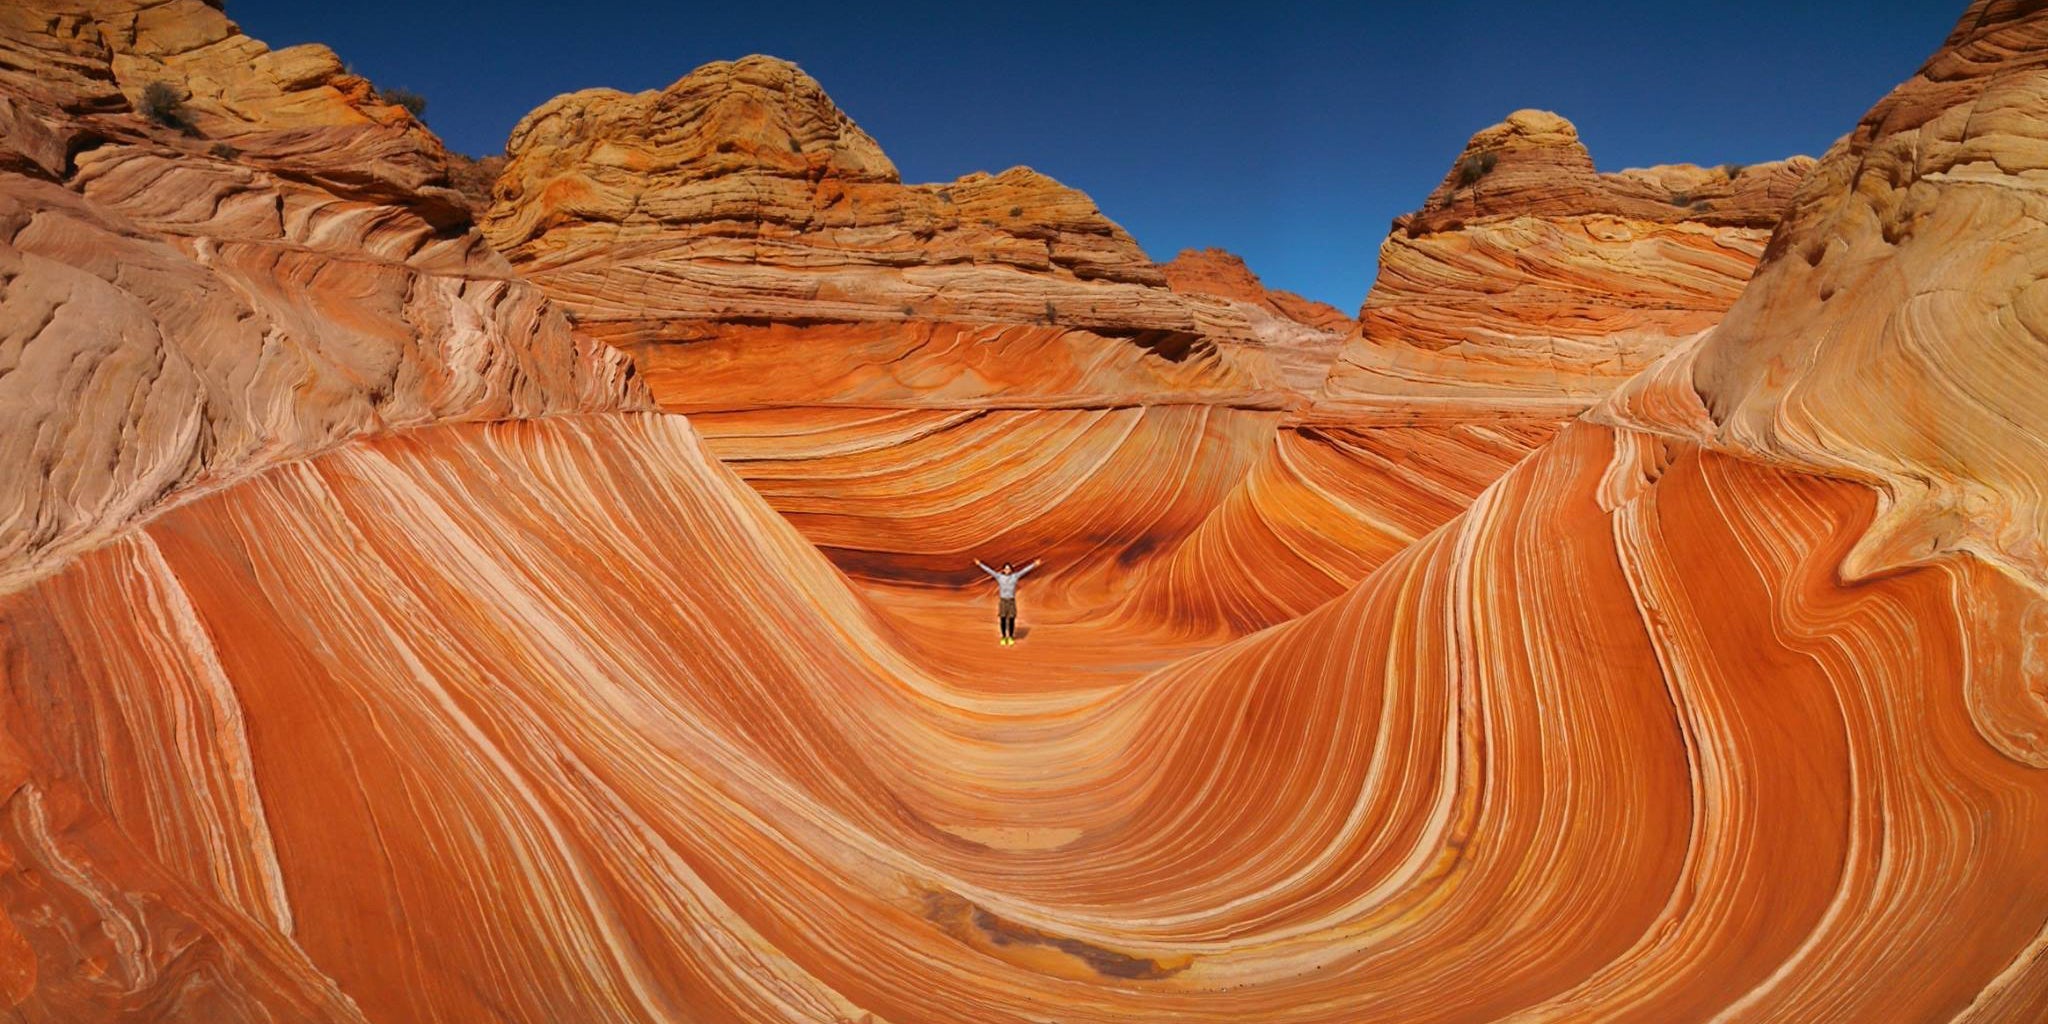 The Wave rock formation in Page, Arizona